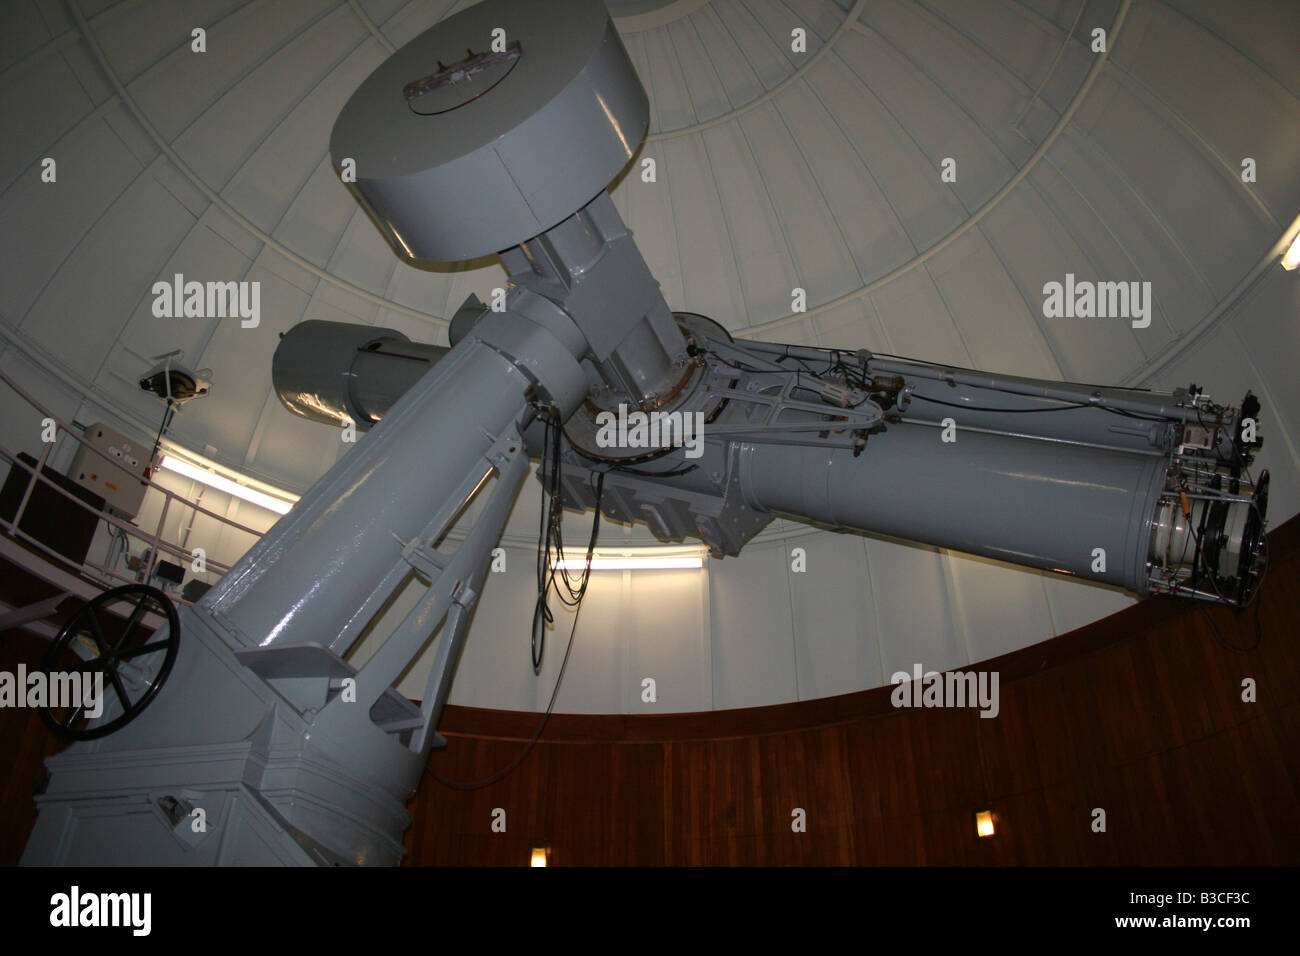 Astronomical telescope, Herstmonceux, England Stock Photo